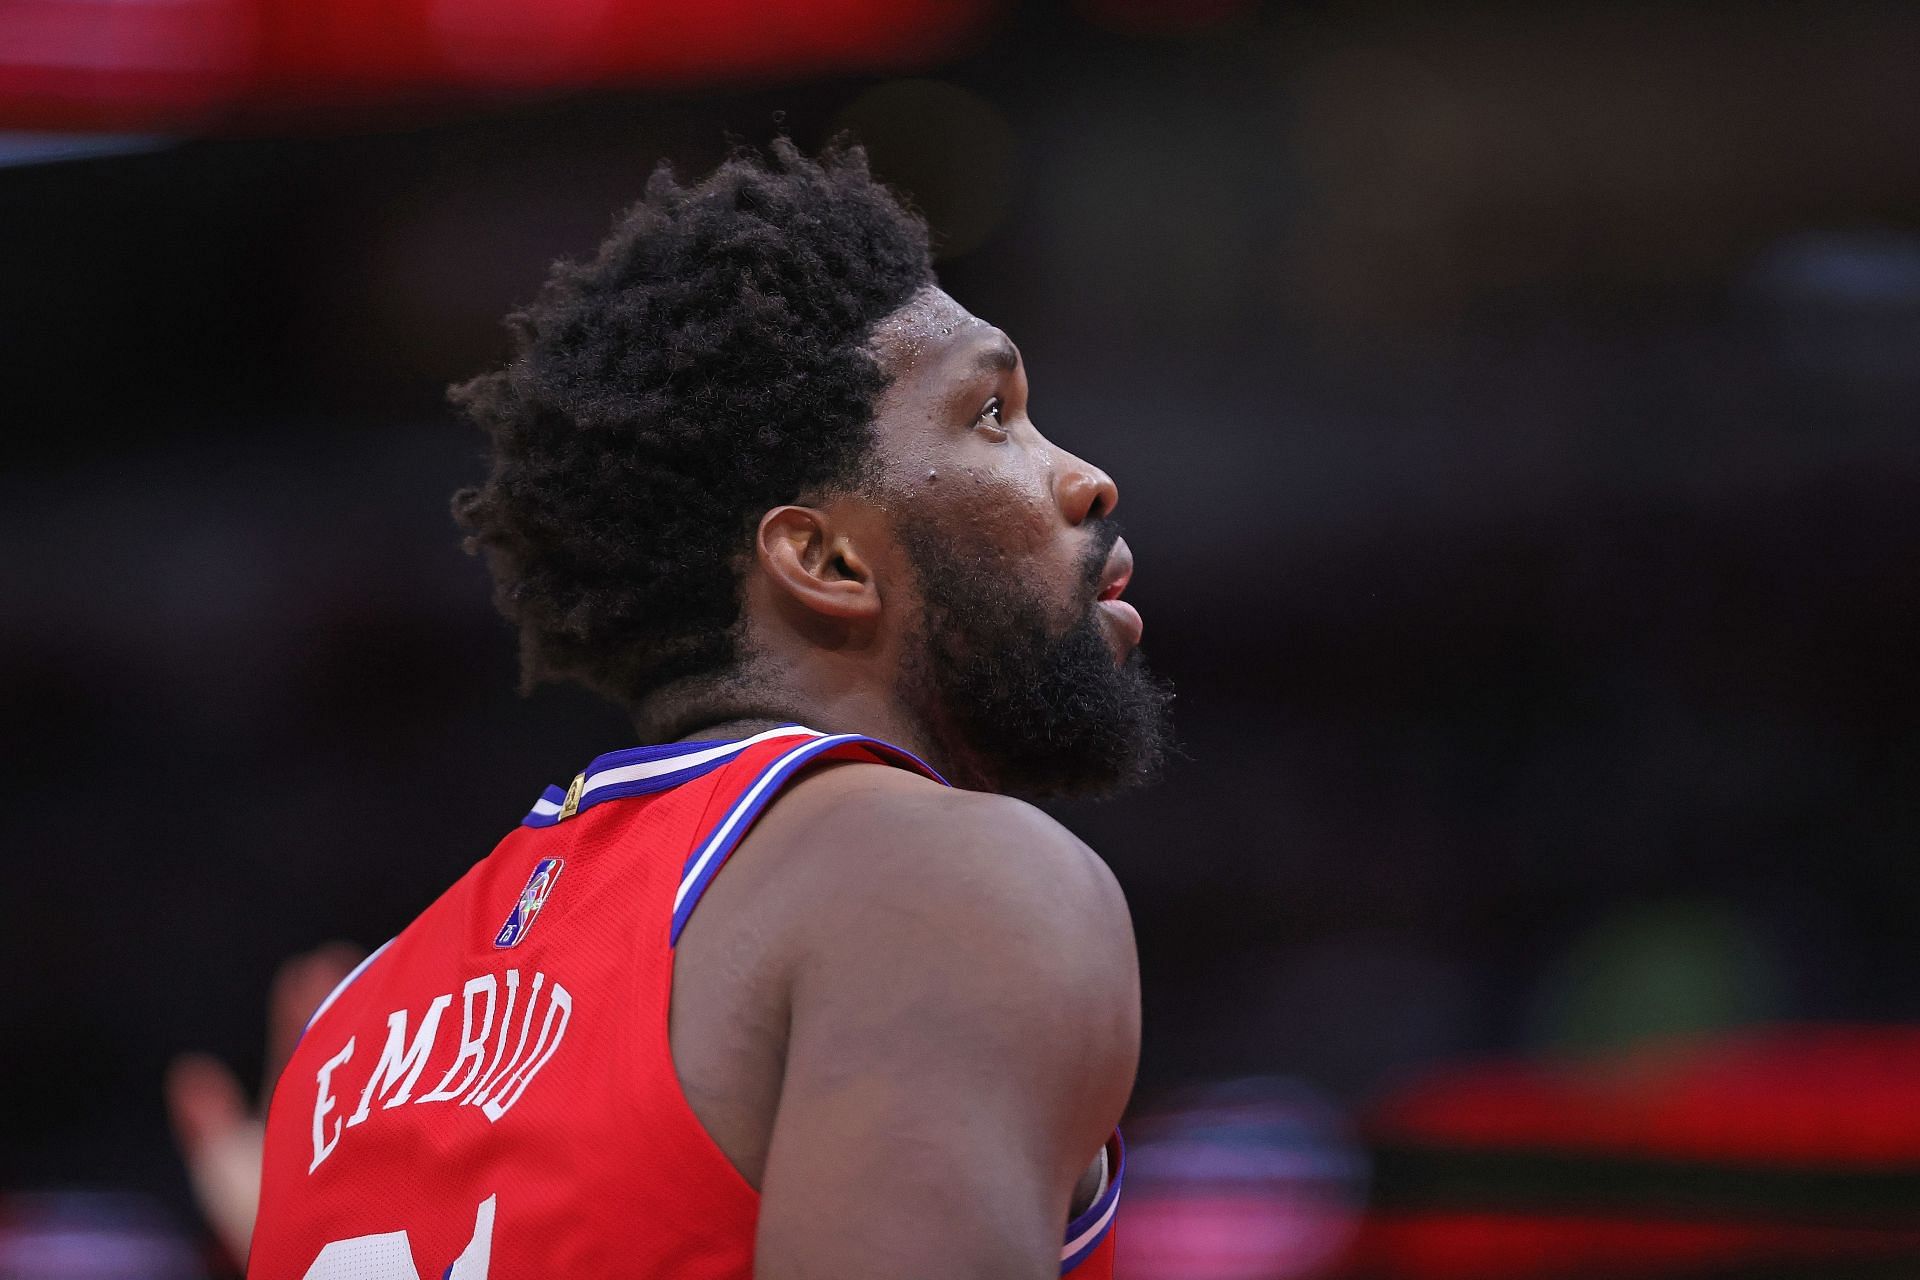 Joel Embiid of the Philadelphia 76ers in action during an NBA game